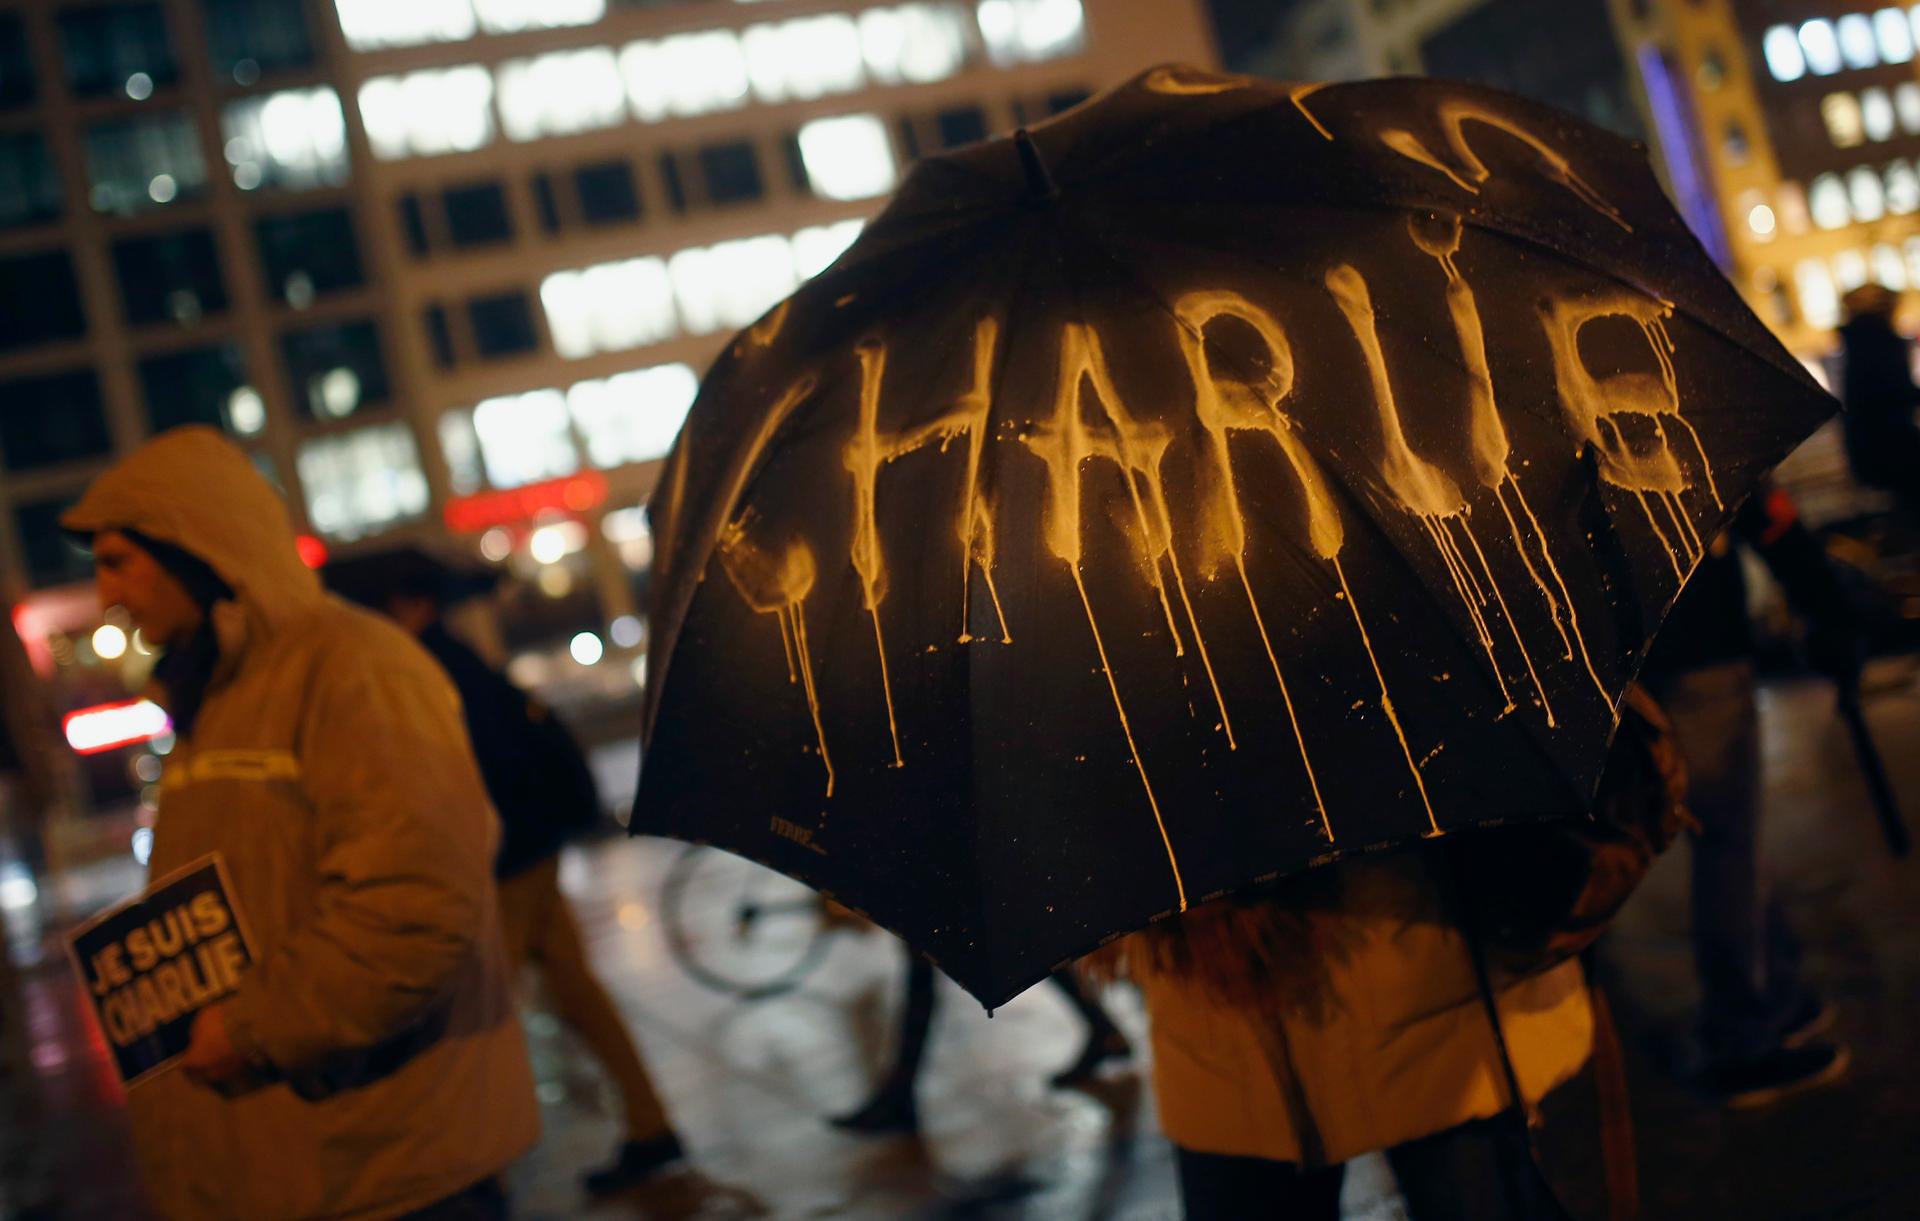 The “I am Charlie” slogan was on display during a vigil in Frankfurt, Germany following the deadly shooting attack in Paris this week. 